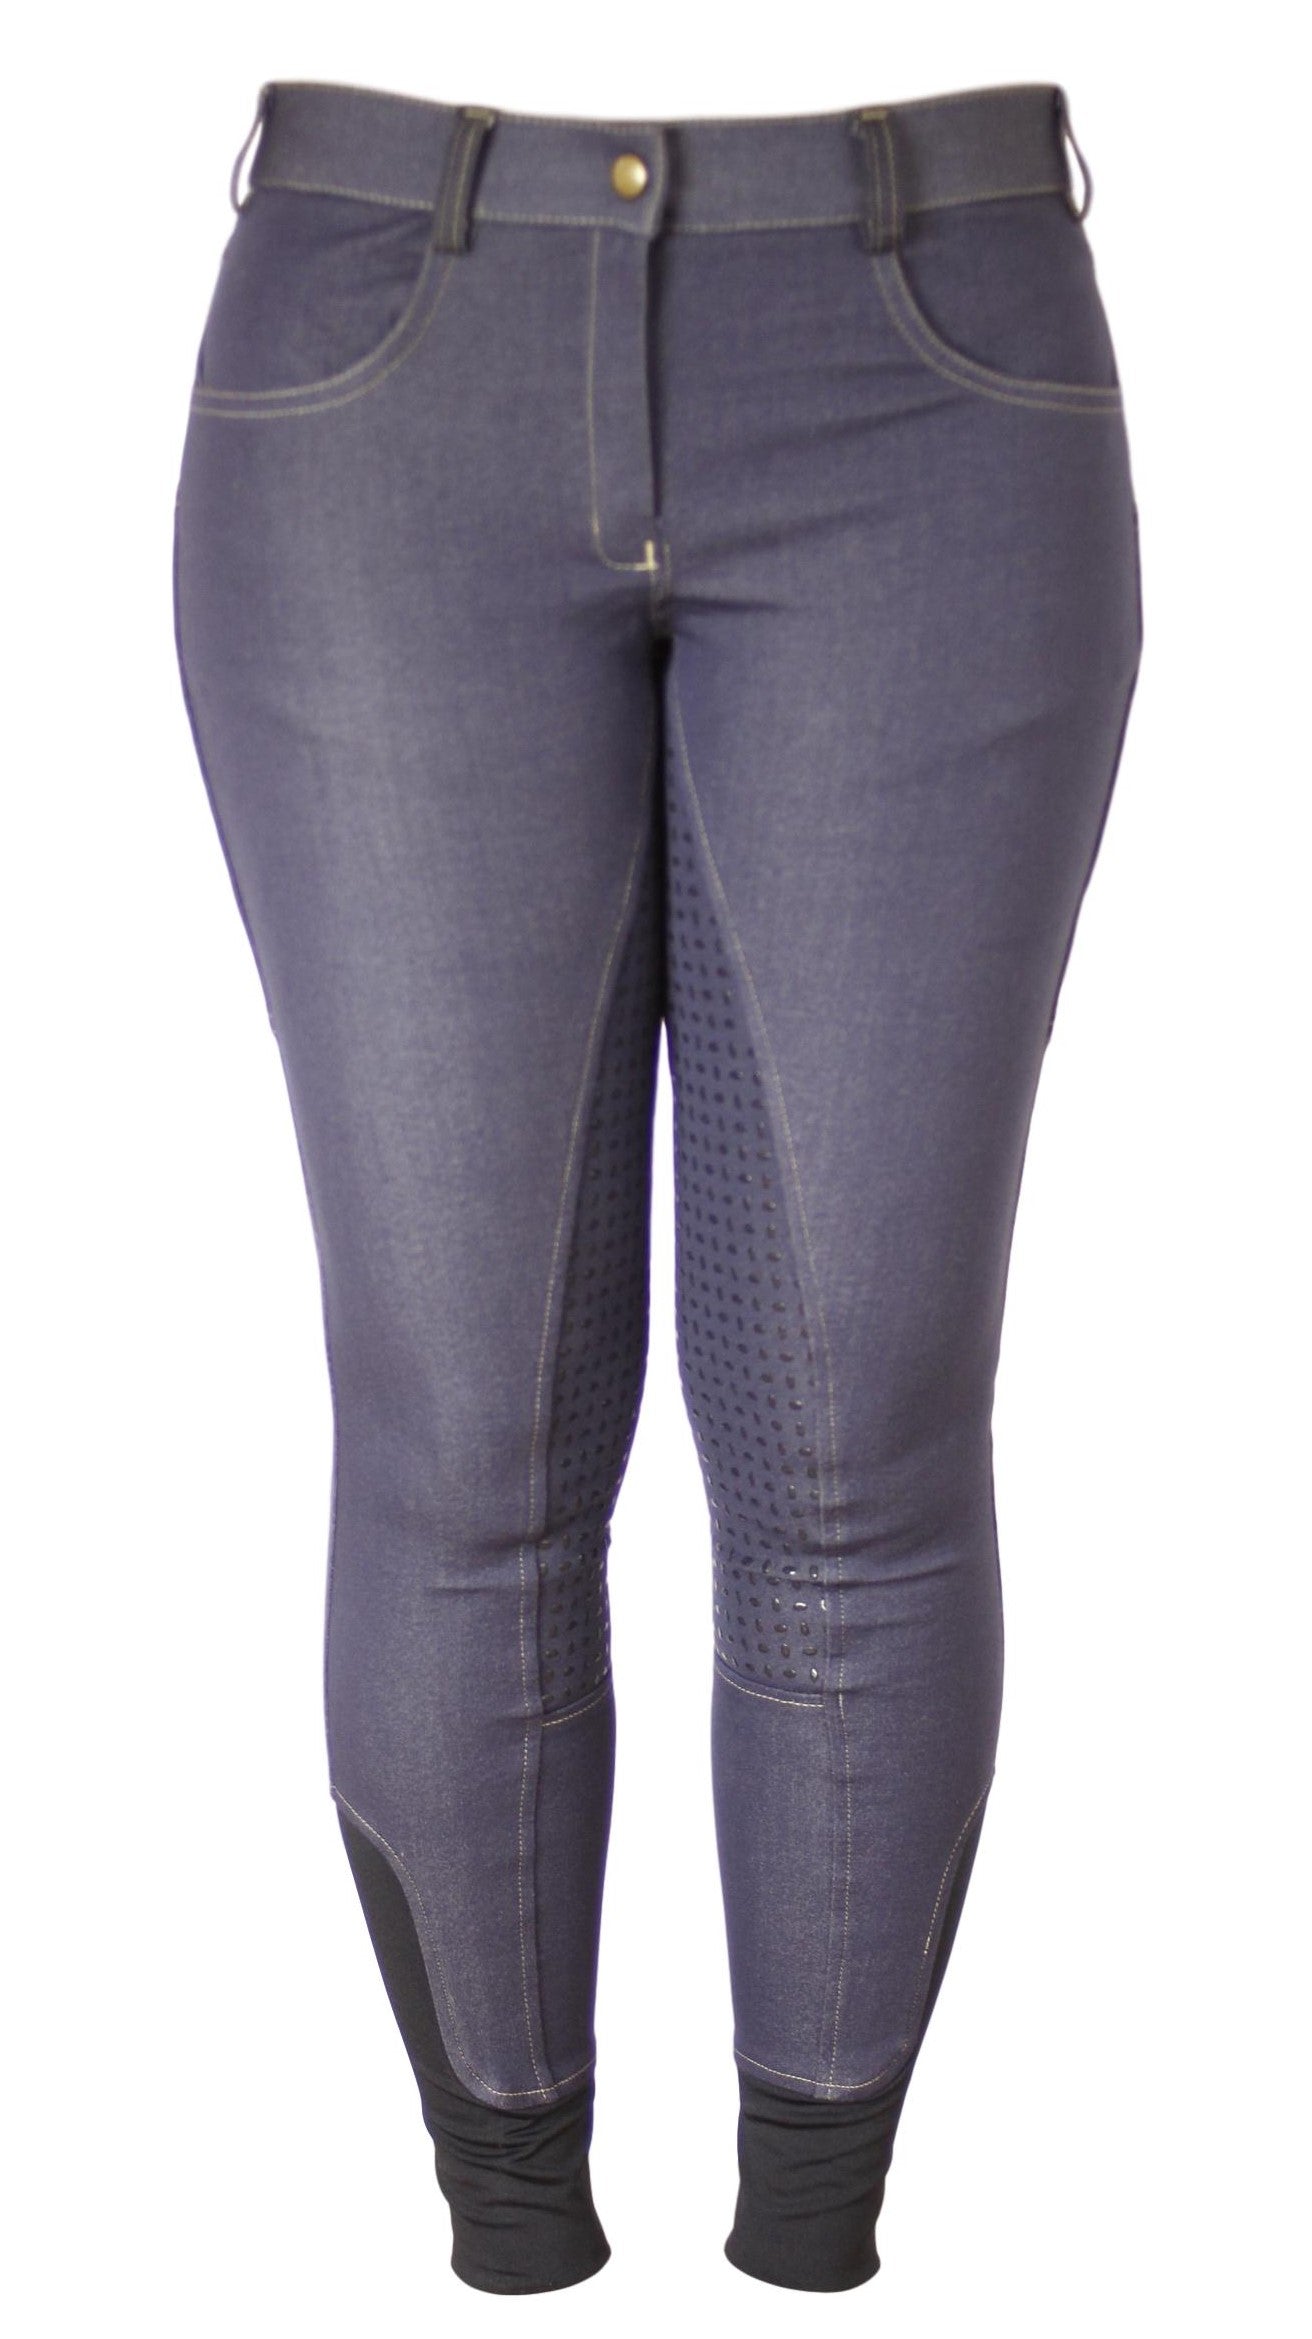 Denim Breeches with silicone seat and phone pocket-Plum Tack-The Equestrian